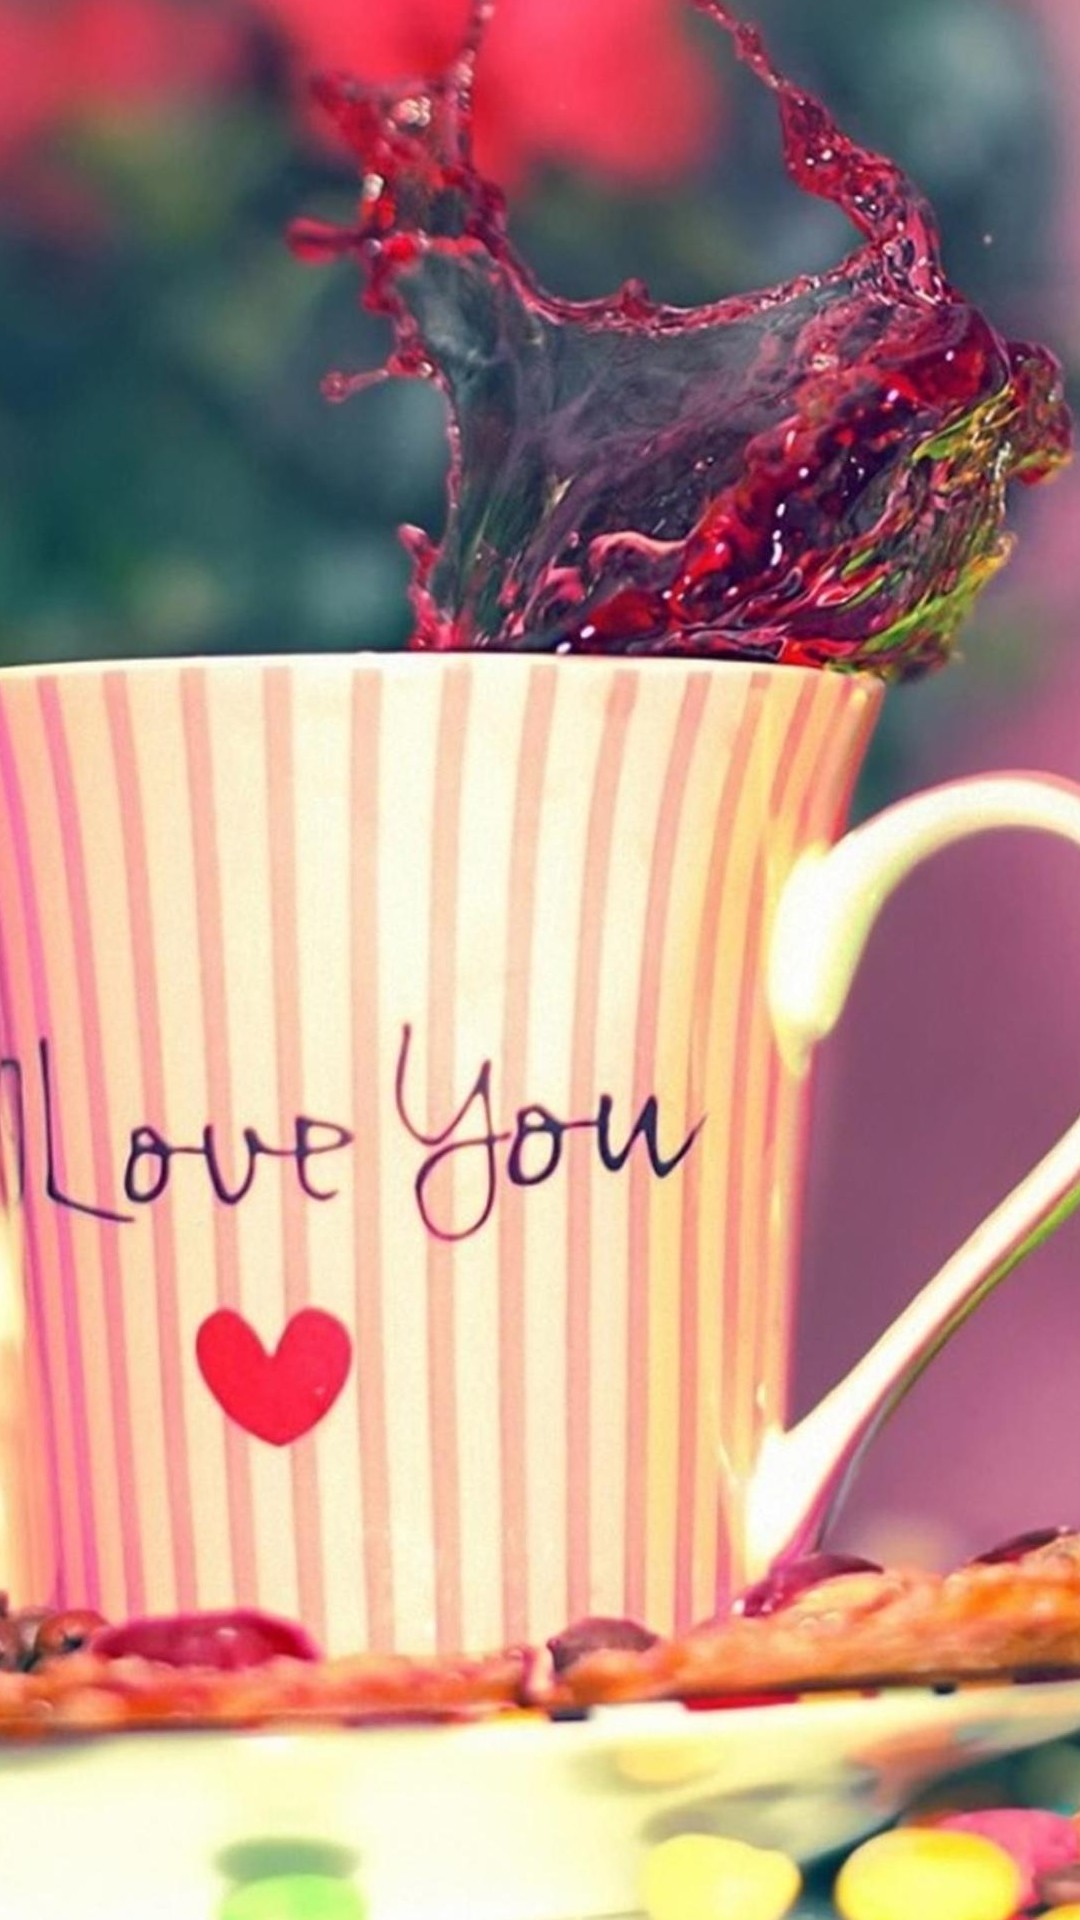 Love You Gift Download - HD Wallpaper 